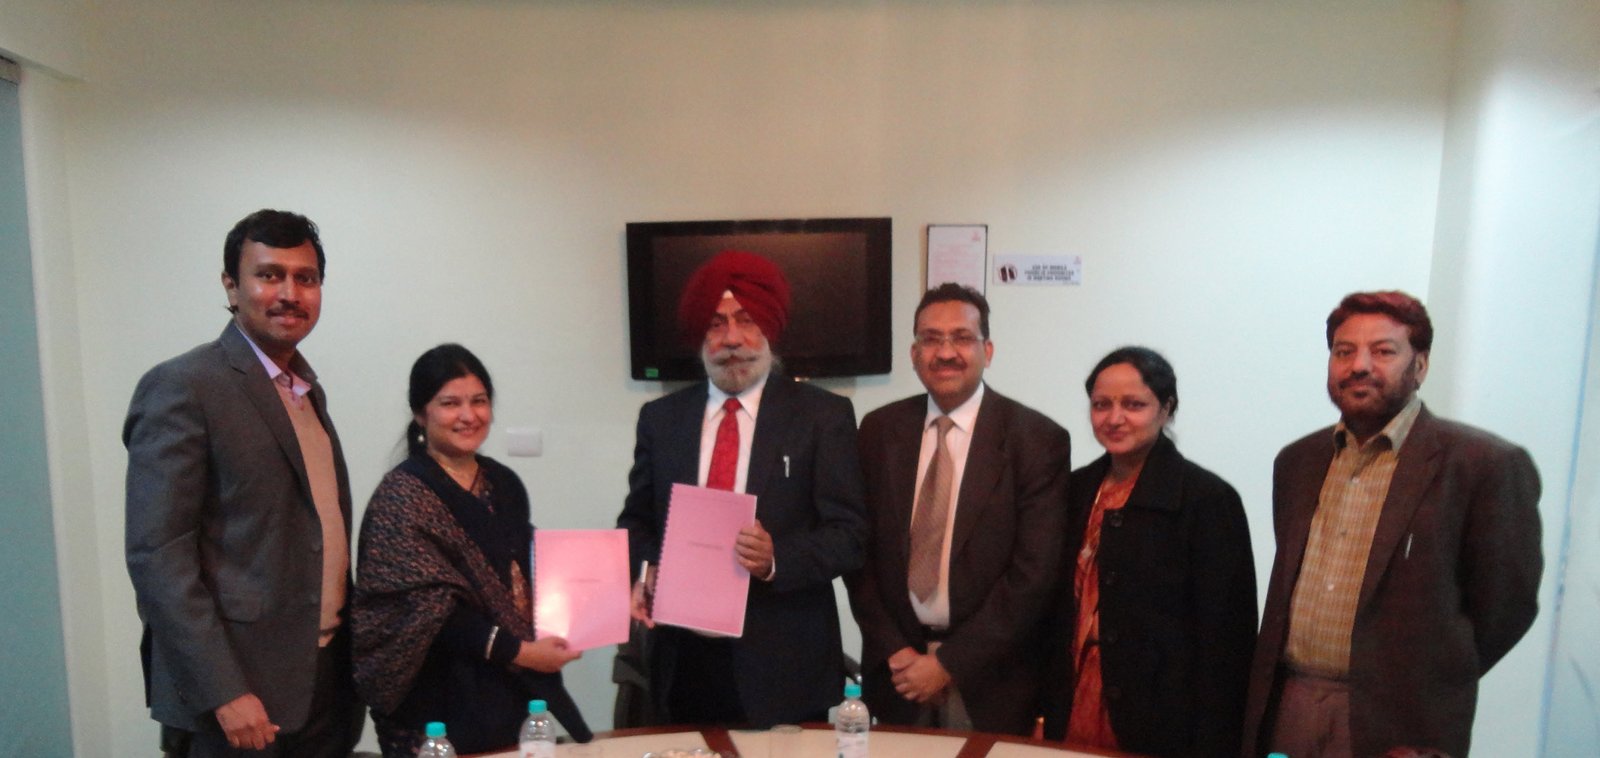  Dr Manu Chaudhary (second from left), Director, Research, Venus Medicine Research Centre, with Baba Farid University of Health Sciences Vice Chancellor Dr SS Gill (third from left) after signing the MoU.